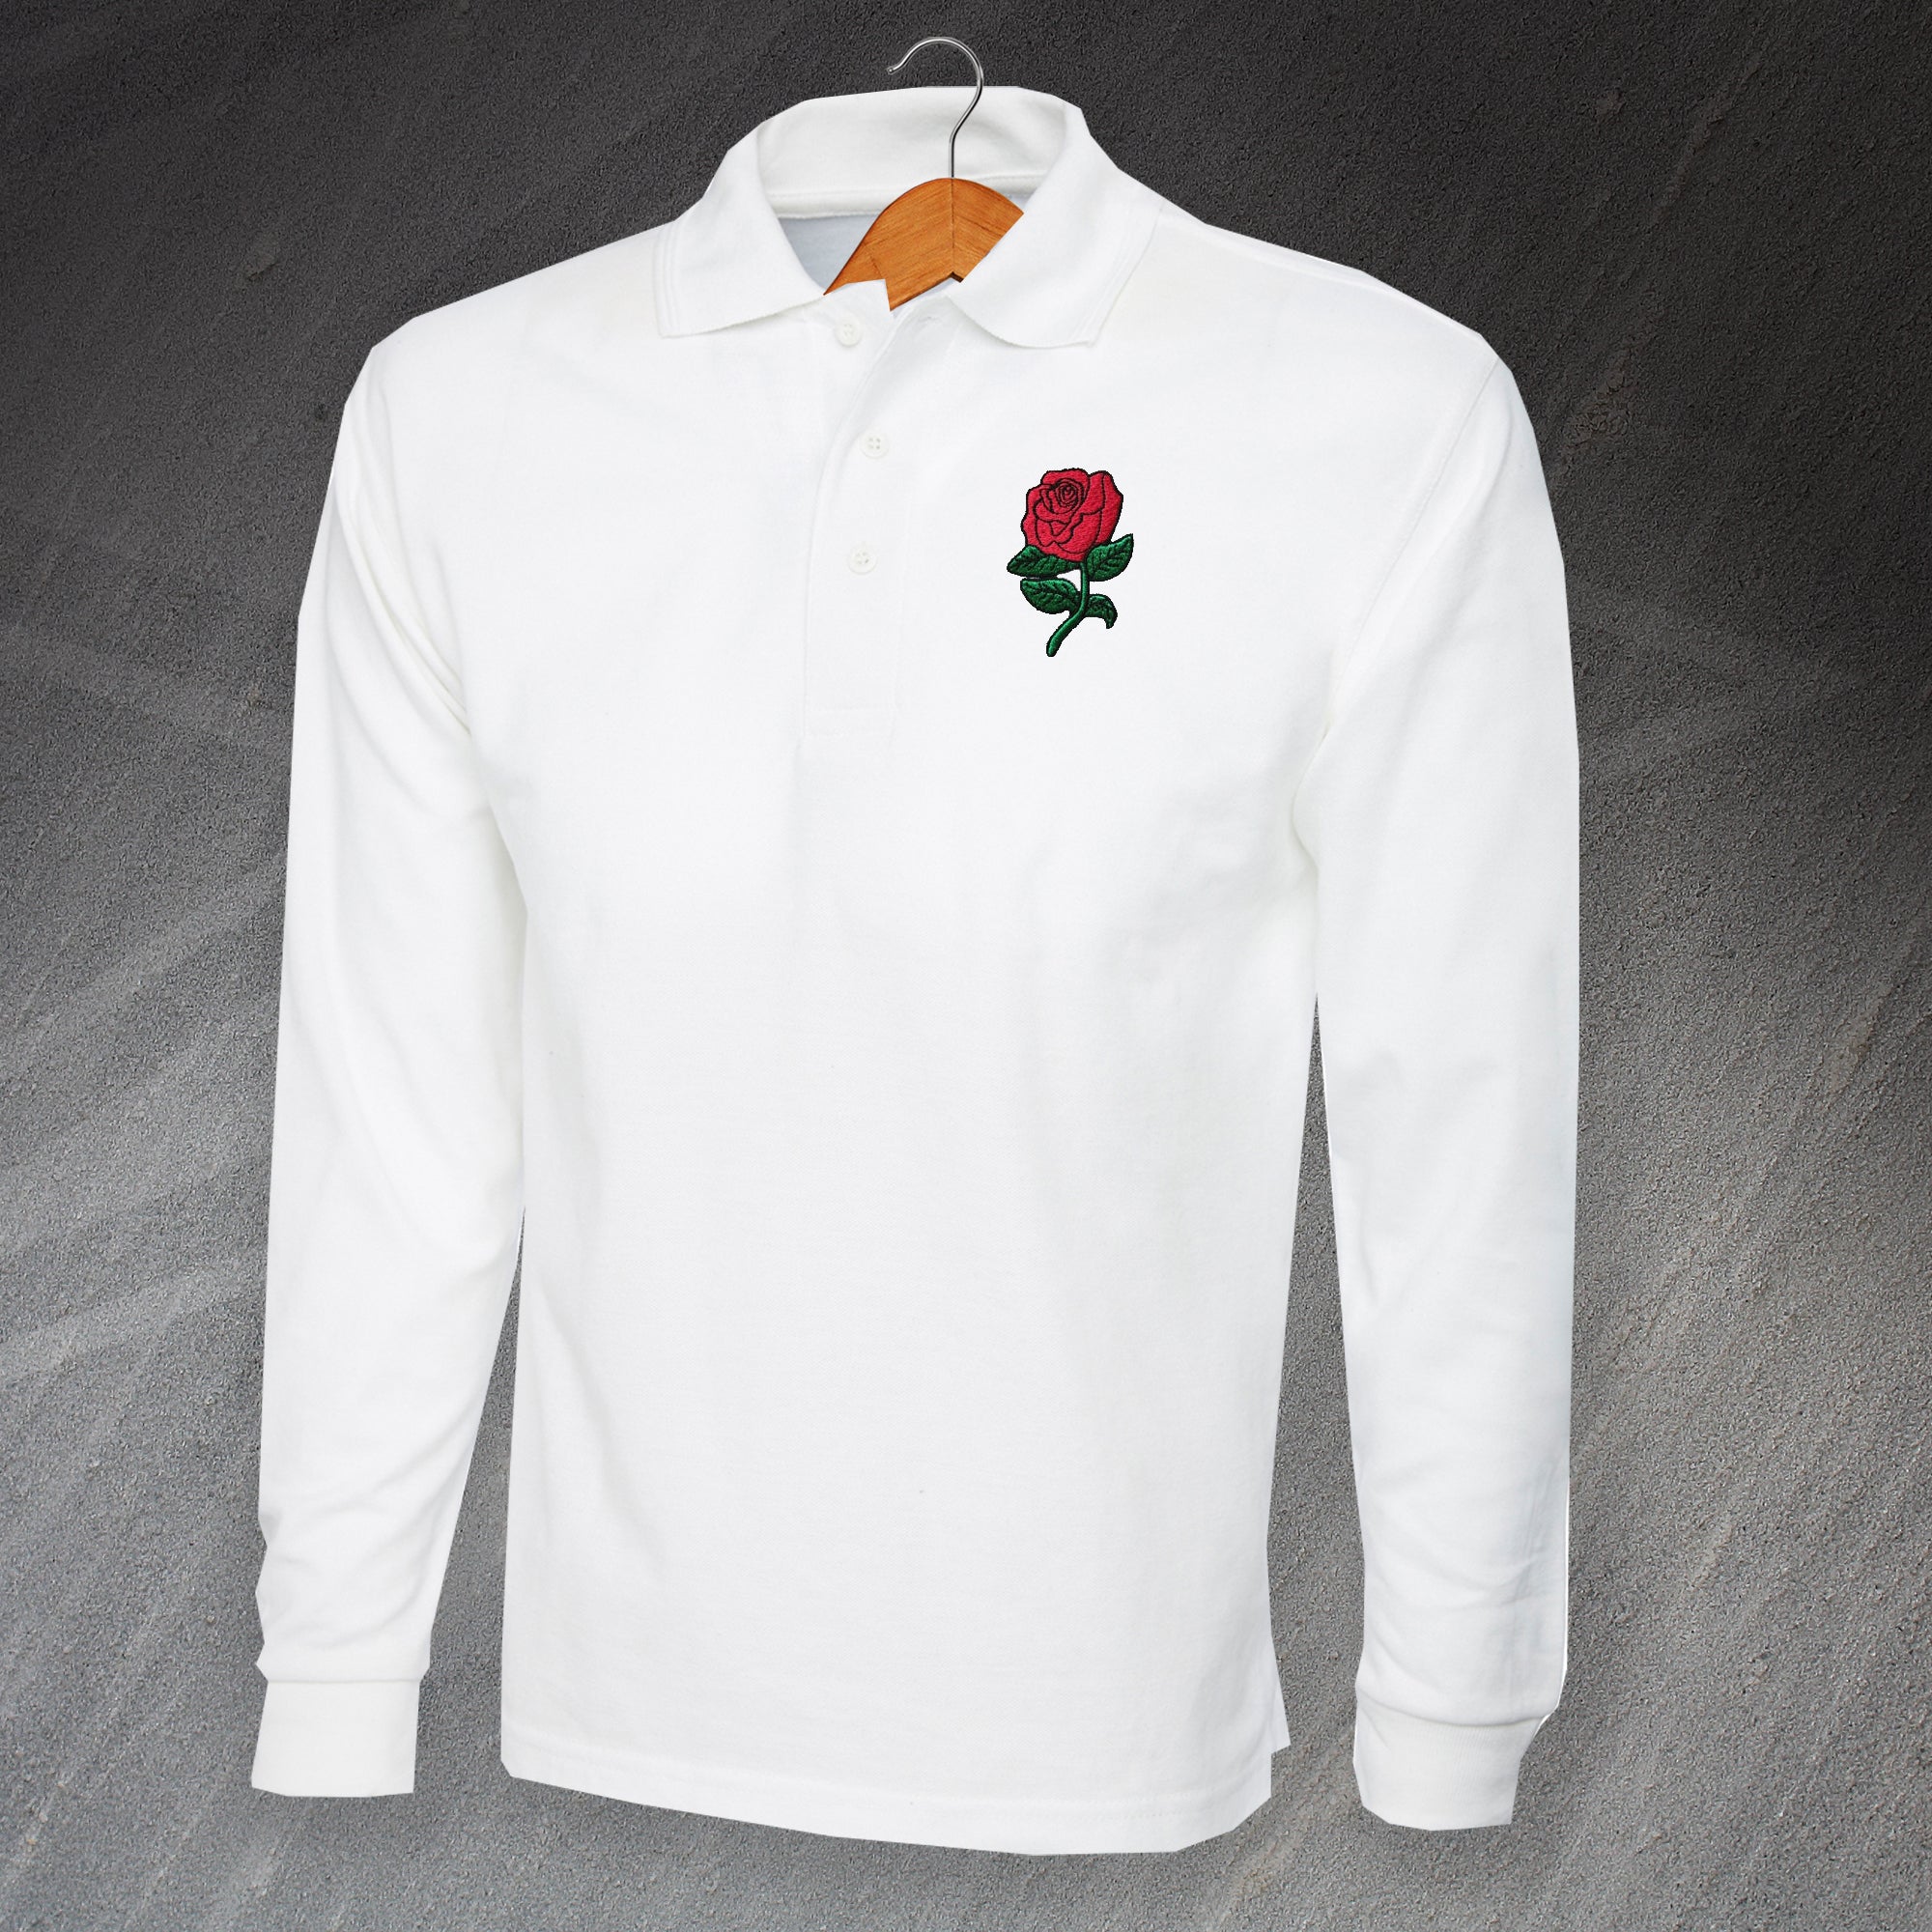 England Rugby Polo Shirt Shop Online for English Rugby Union Tops